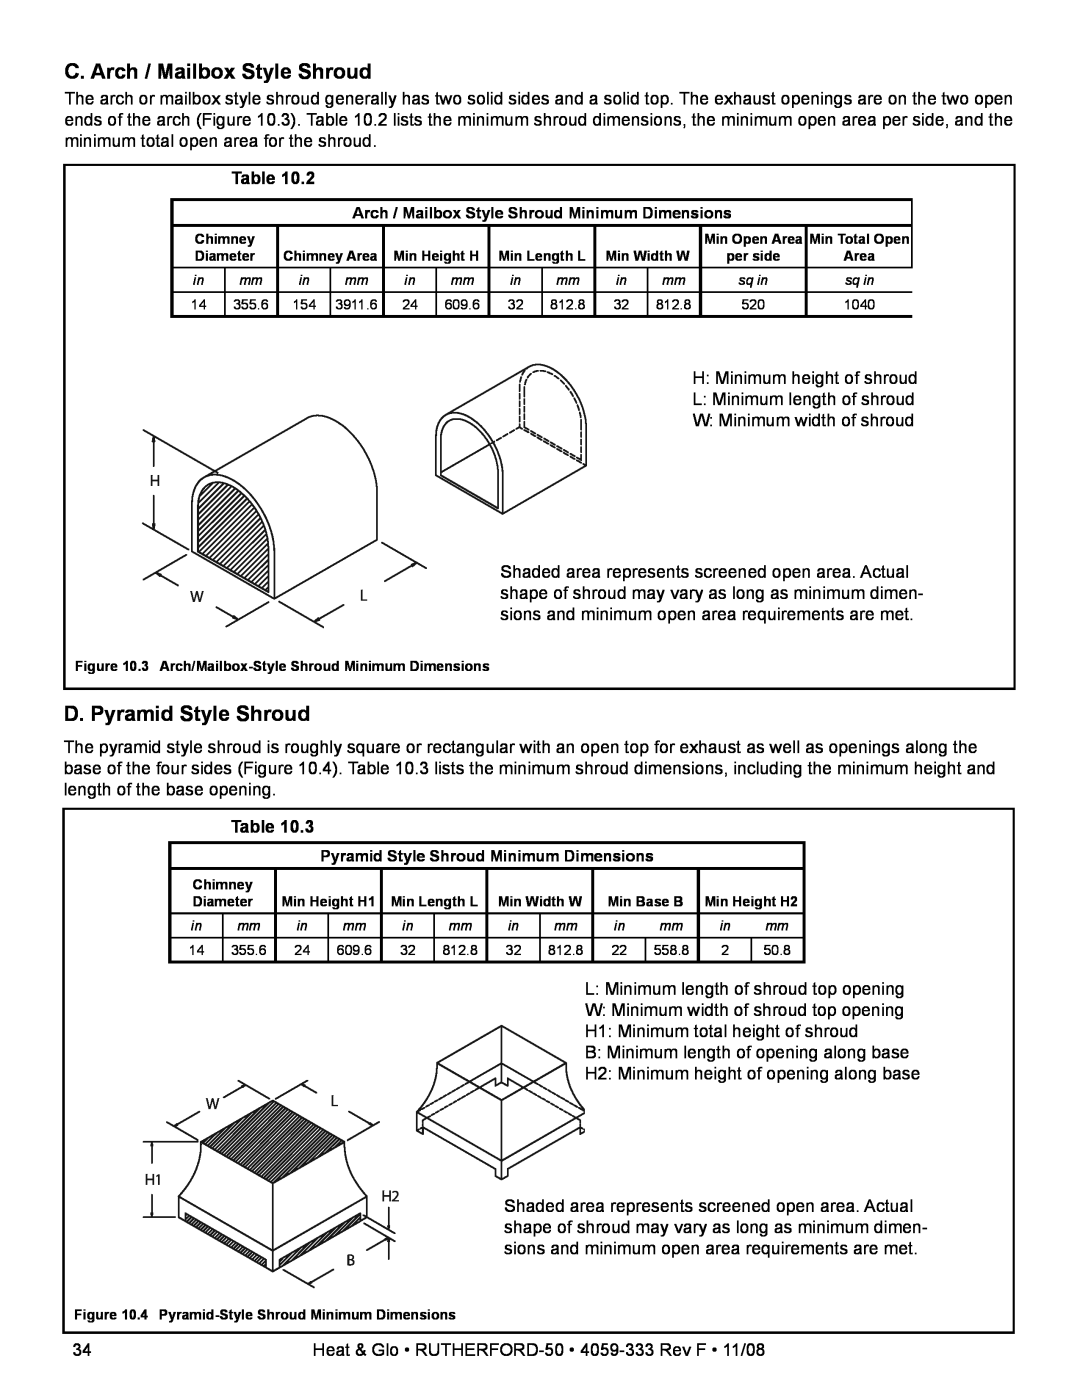 Hearth and Home Technologies RUTHERFORD-50 owner manual C. Arch / Mailbox Style Shroud, D. Pyramid Style Shroud 